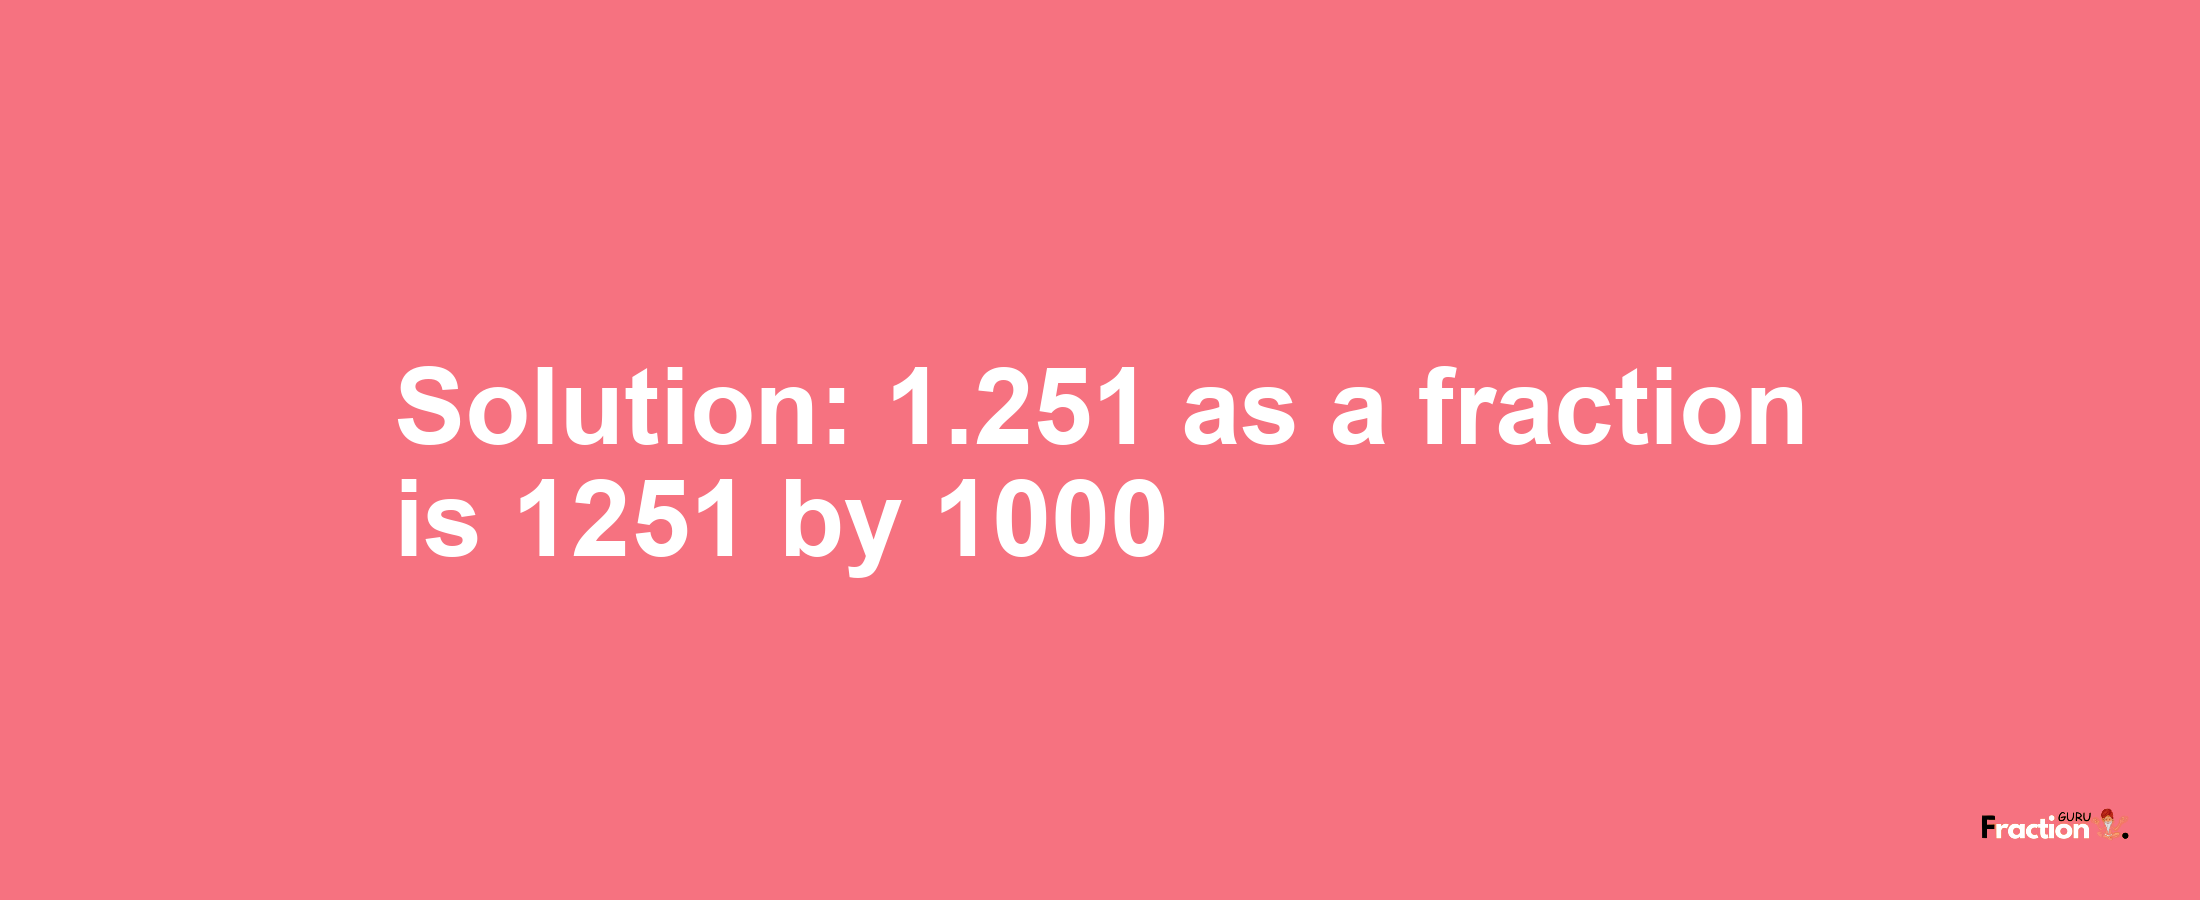 Solution:1.251 as a fraction is 1251/1000